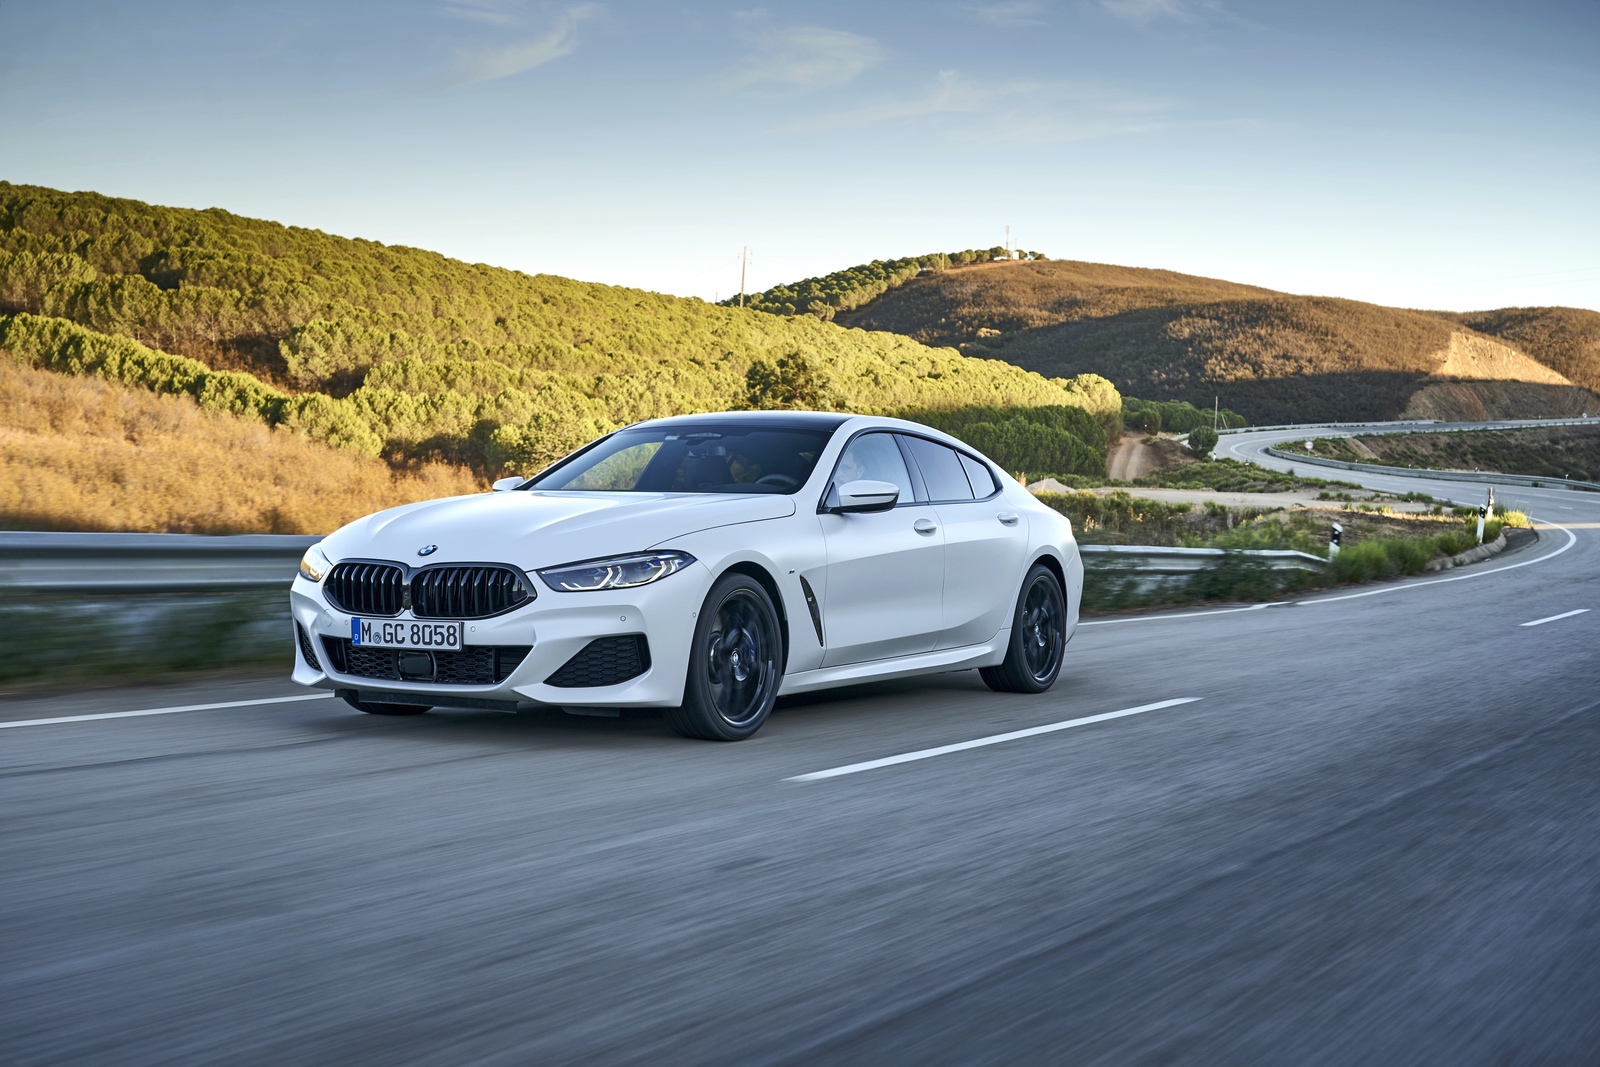 2020 BMW 8 Series Gran Coupe mineral white 55